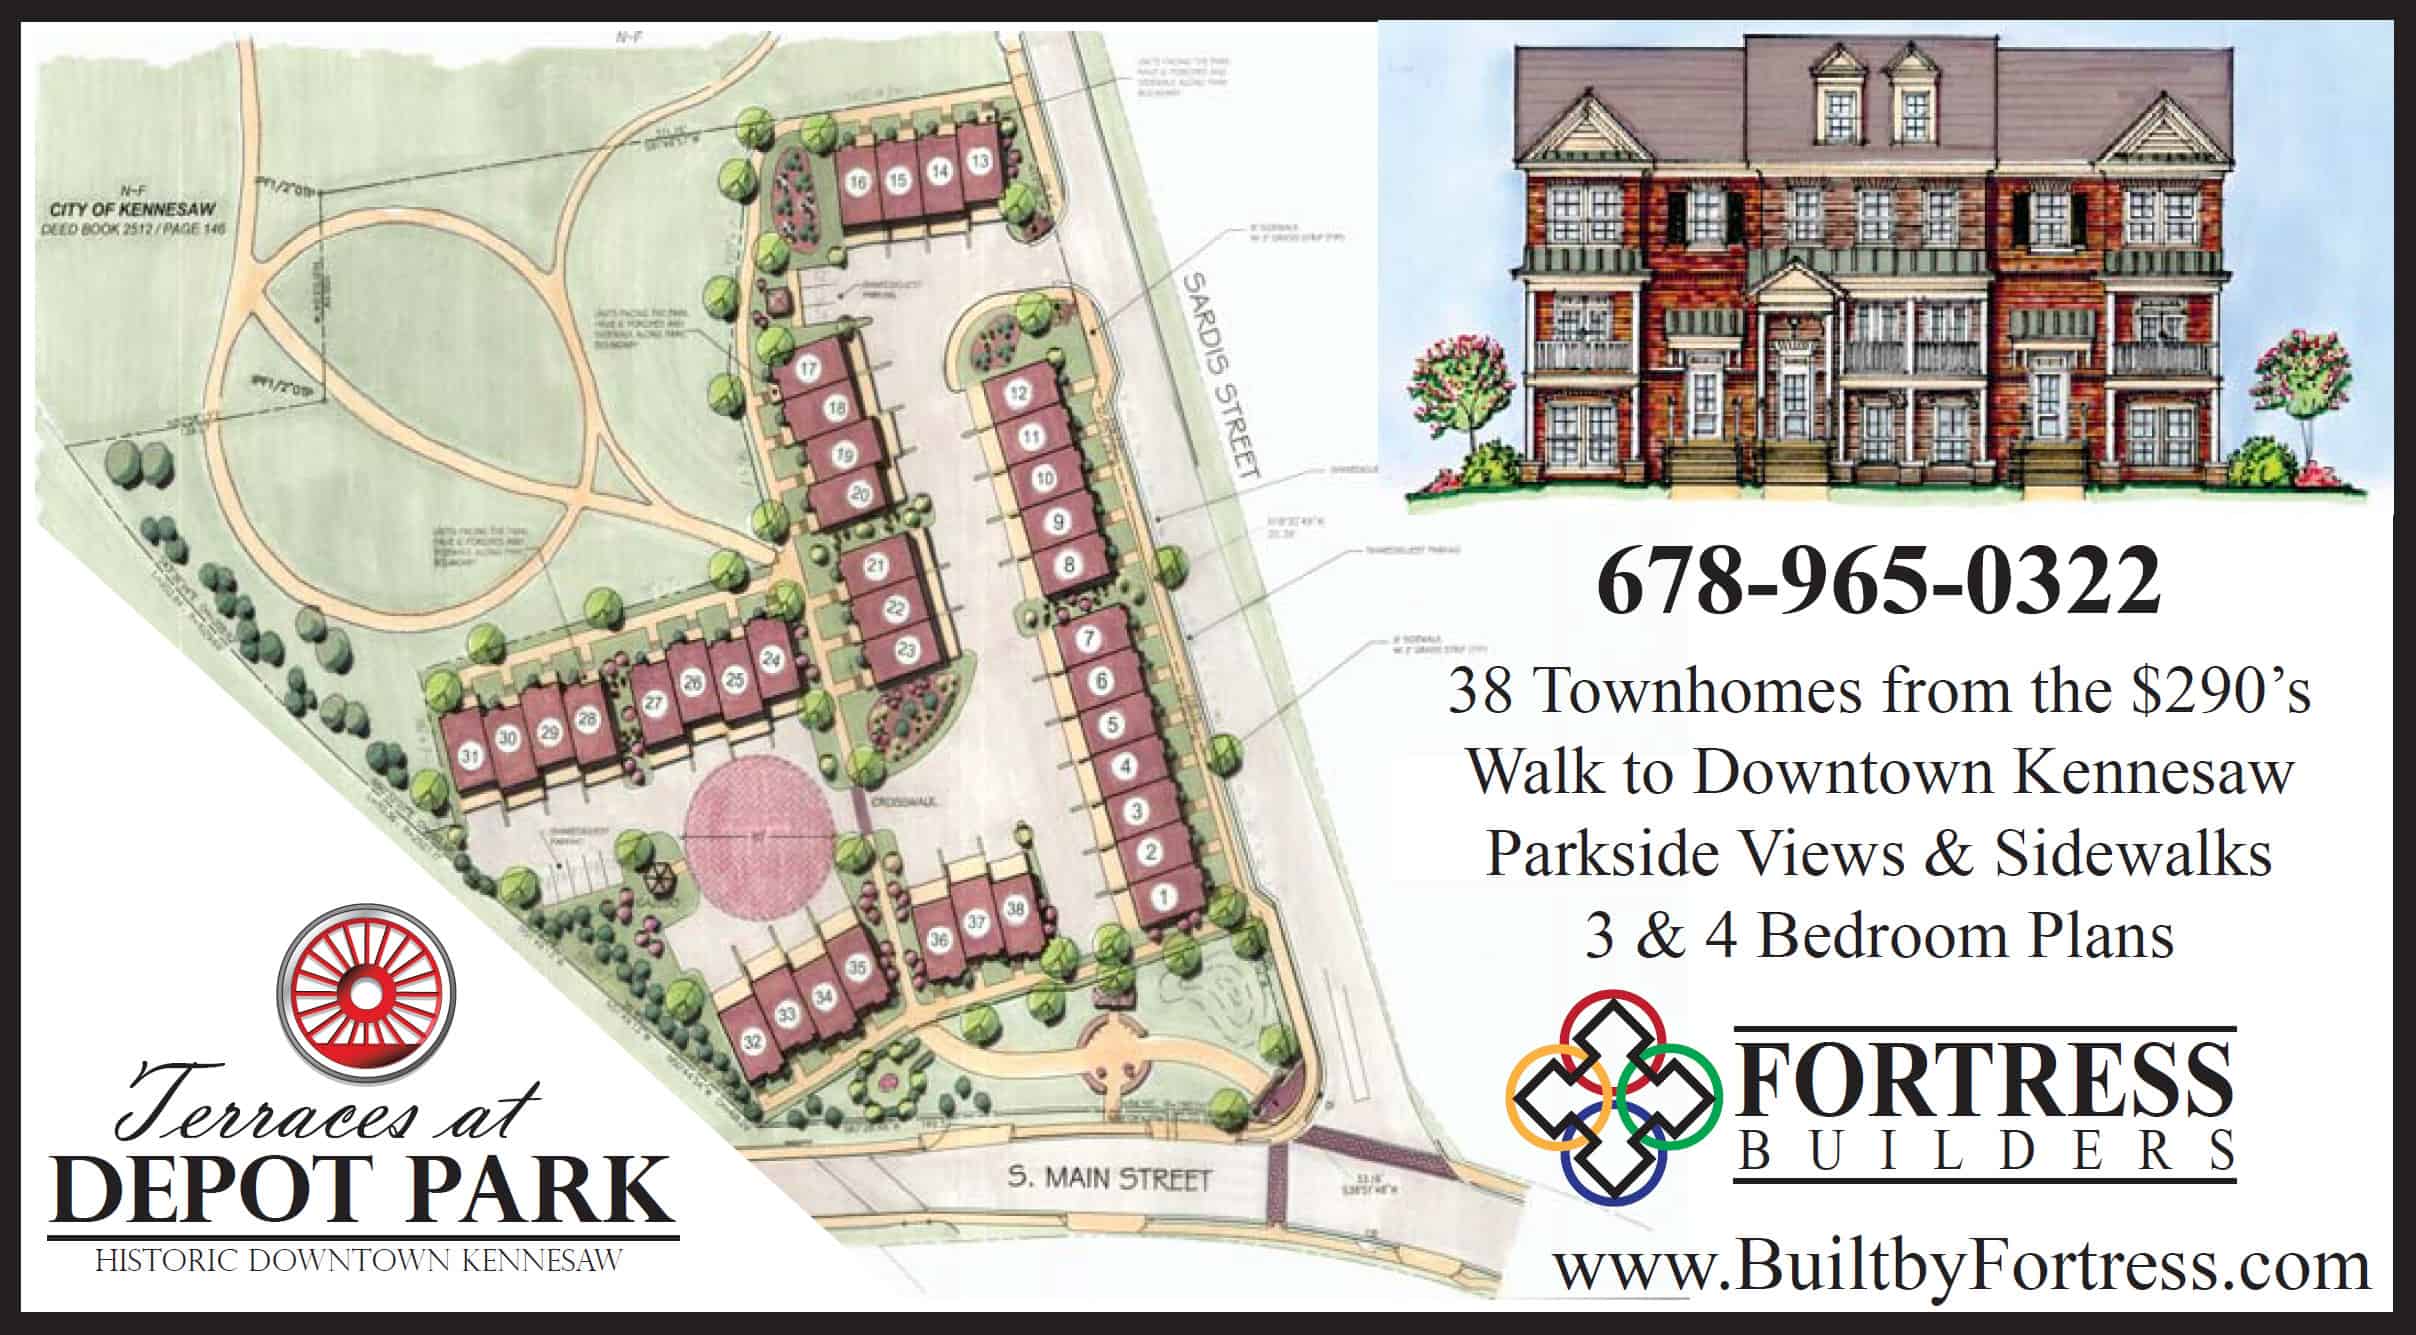 Fortress Builders Announces New Walkable Kennesaw Community